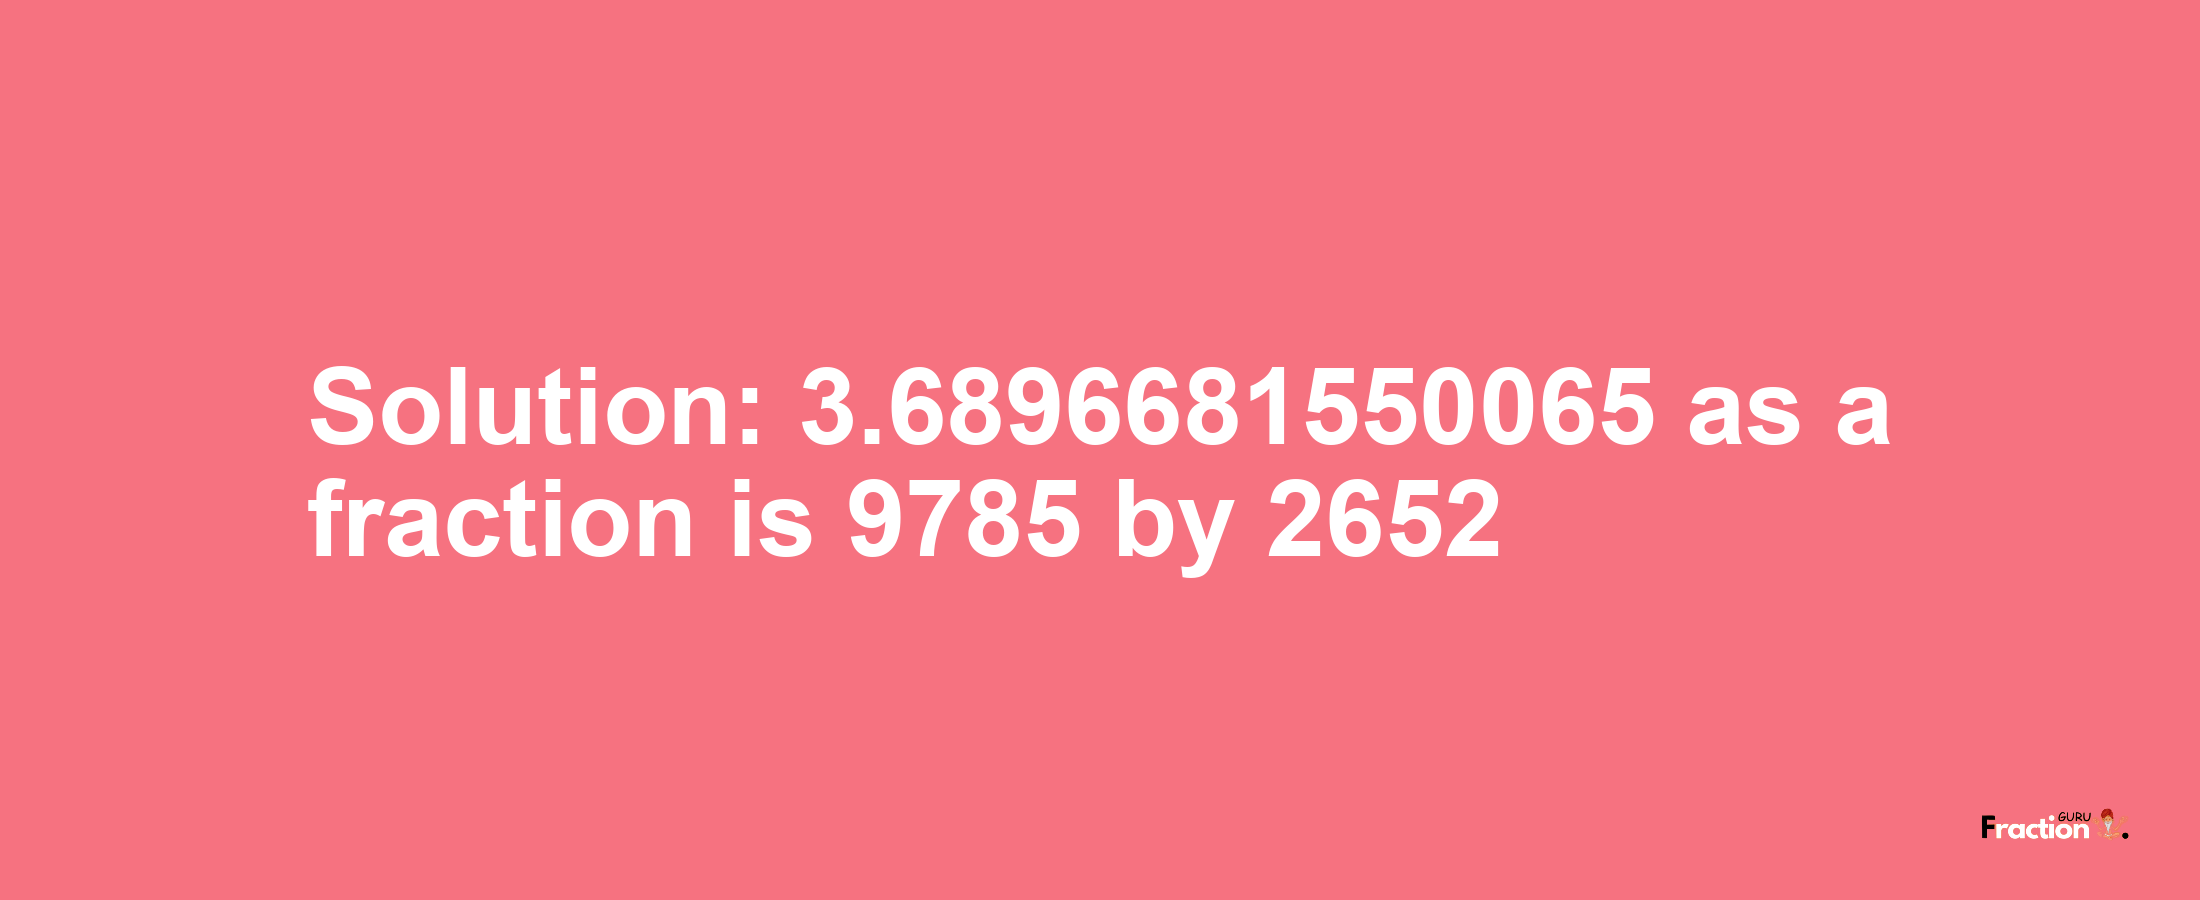 Solution:3.6896681550065 as a fraction is 9785/2652